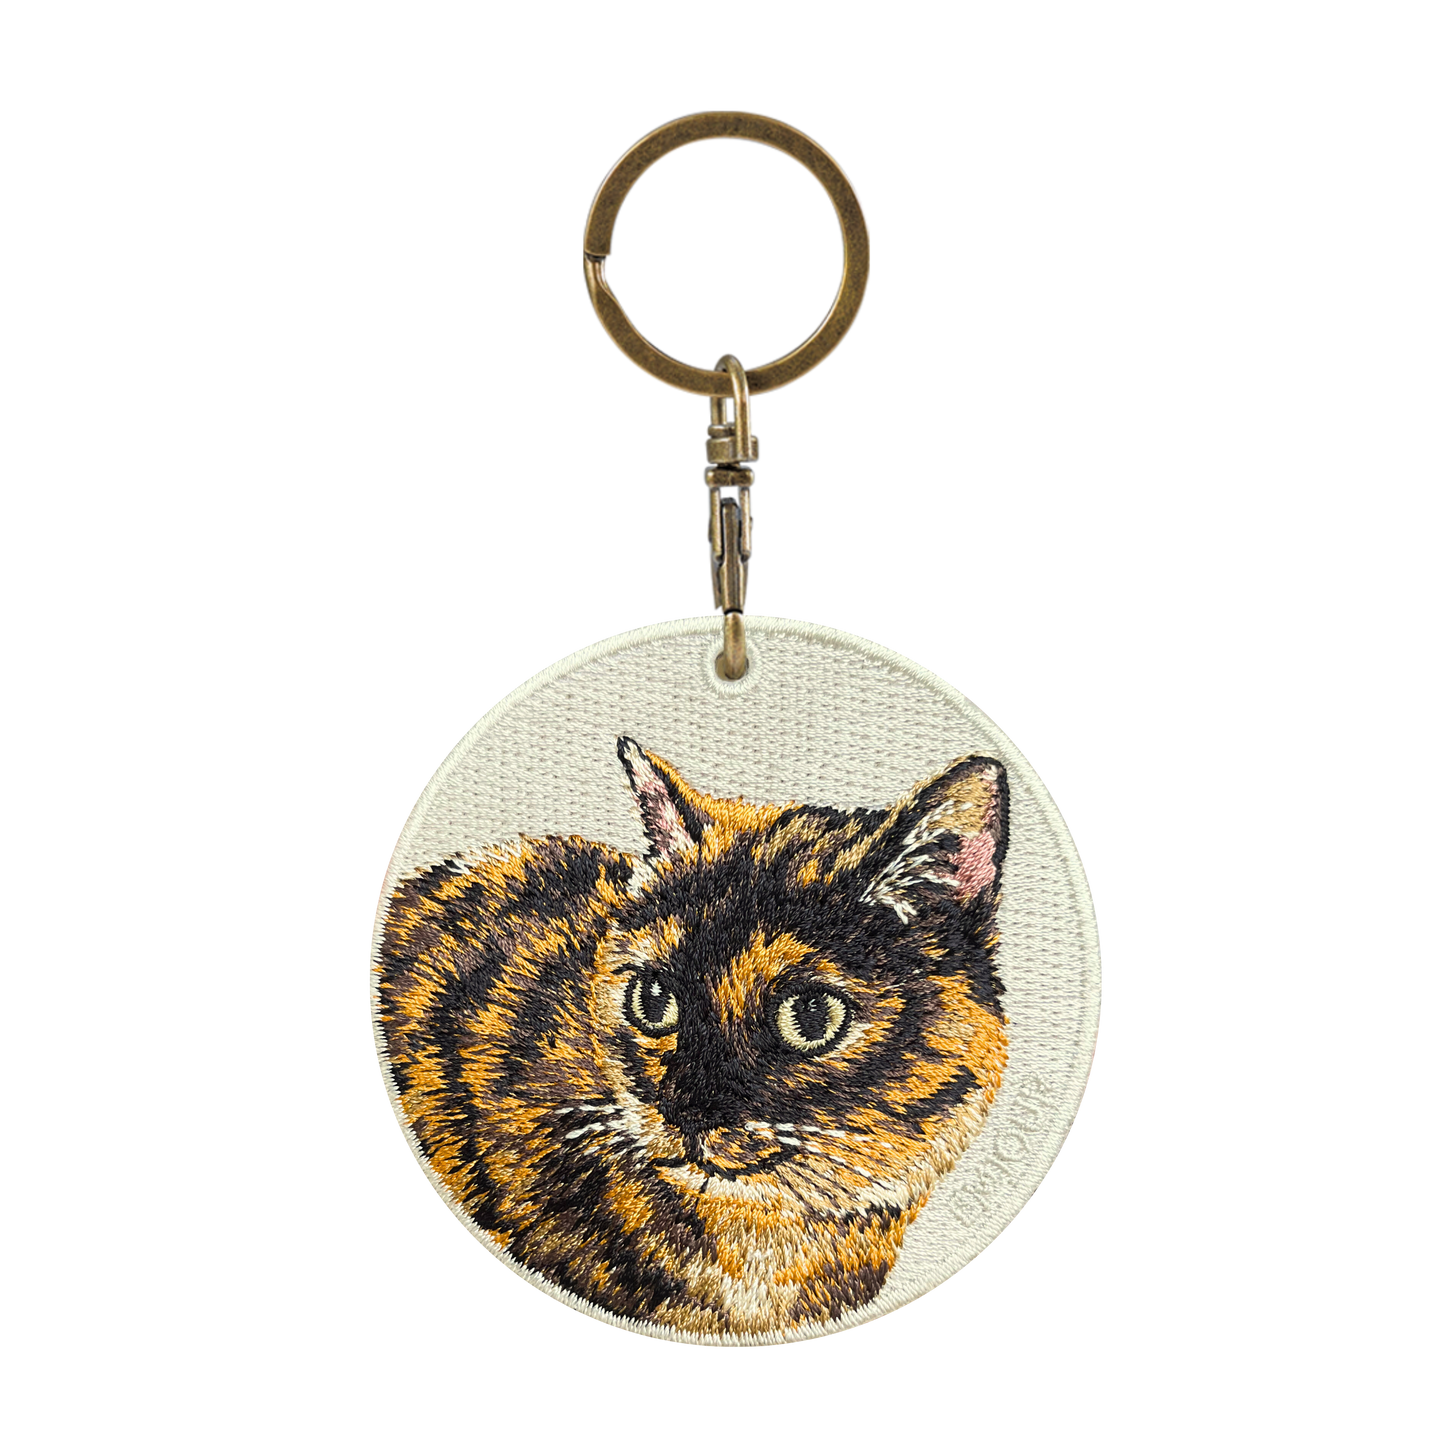 Reversible Embroidered Charm - Garfield